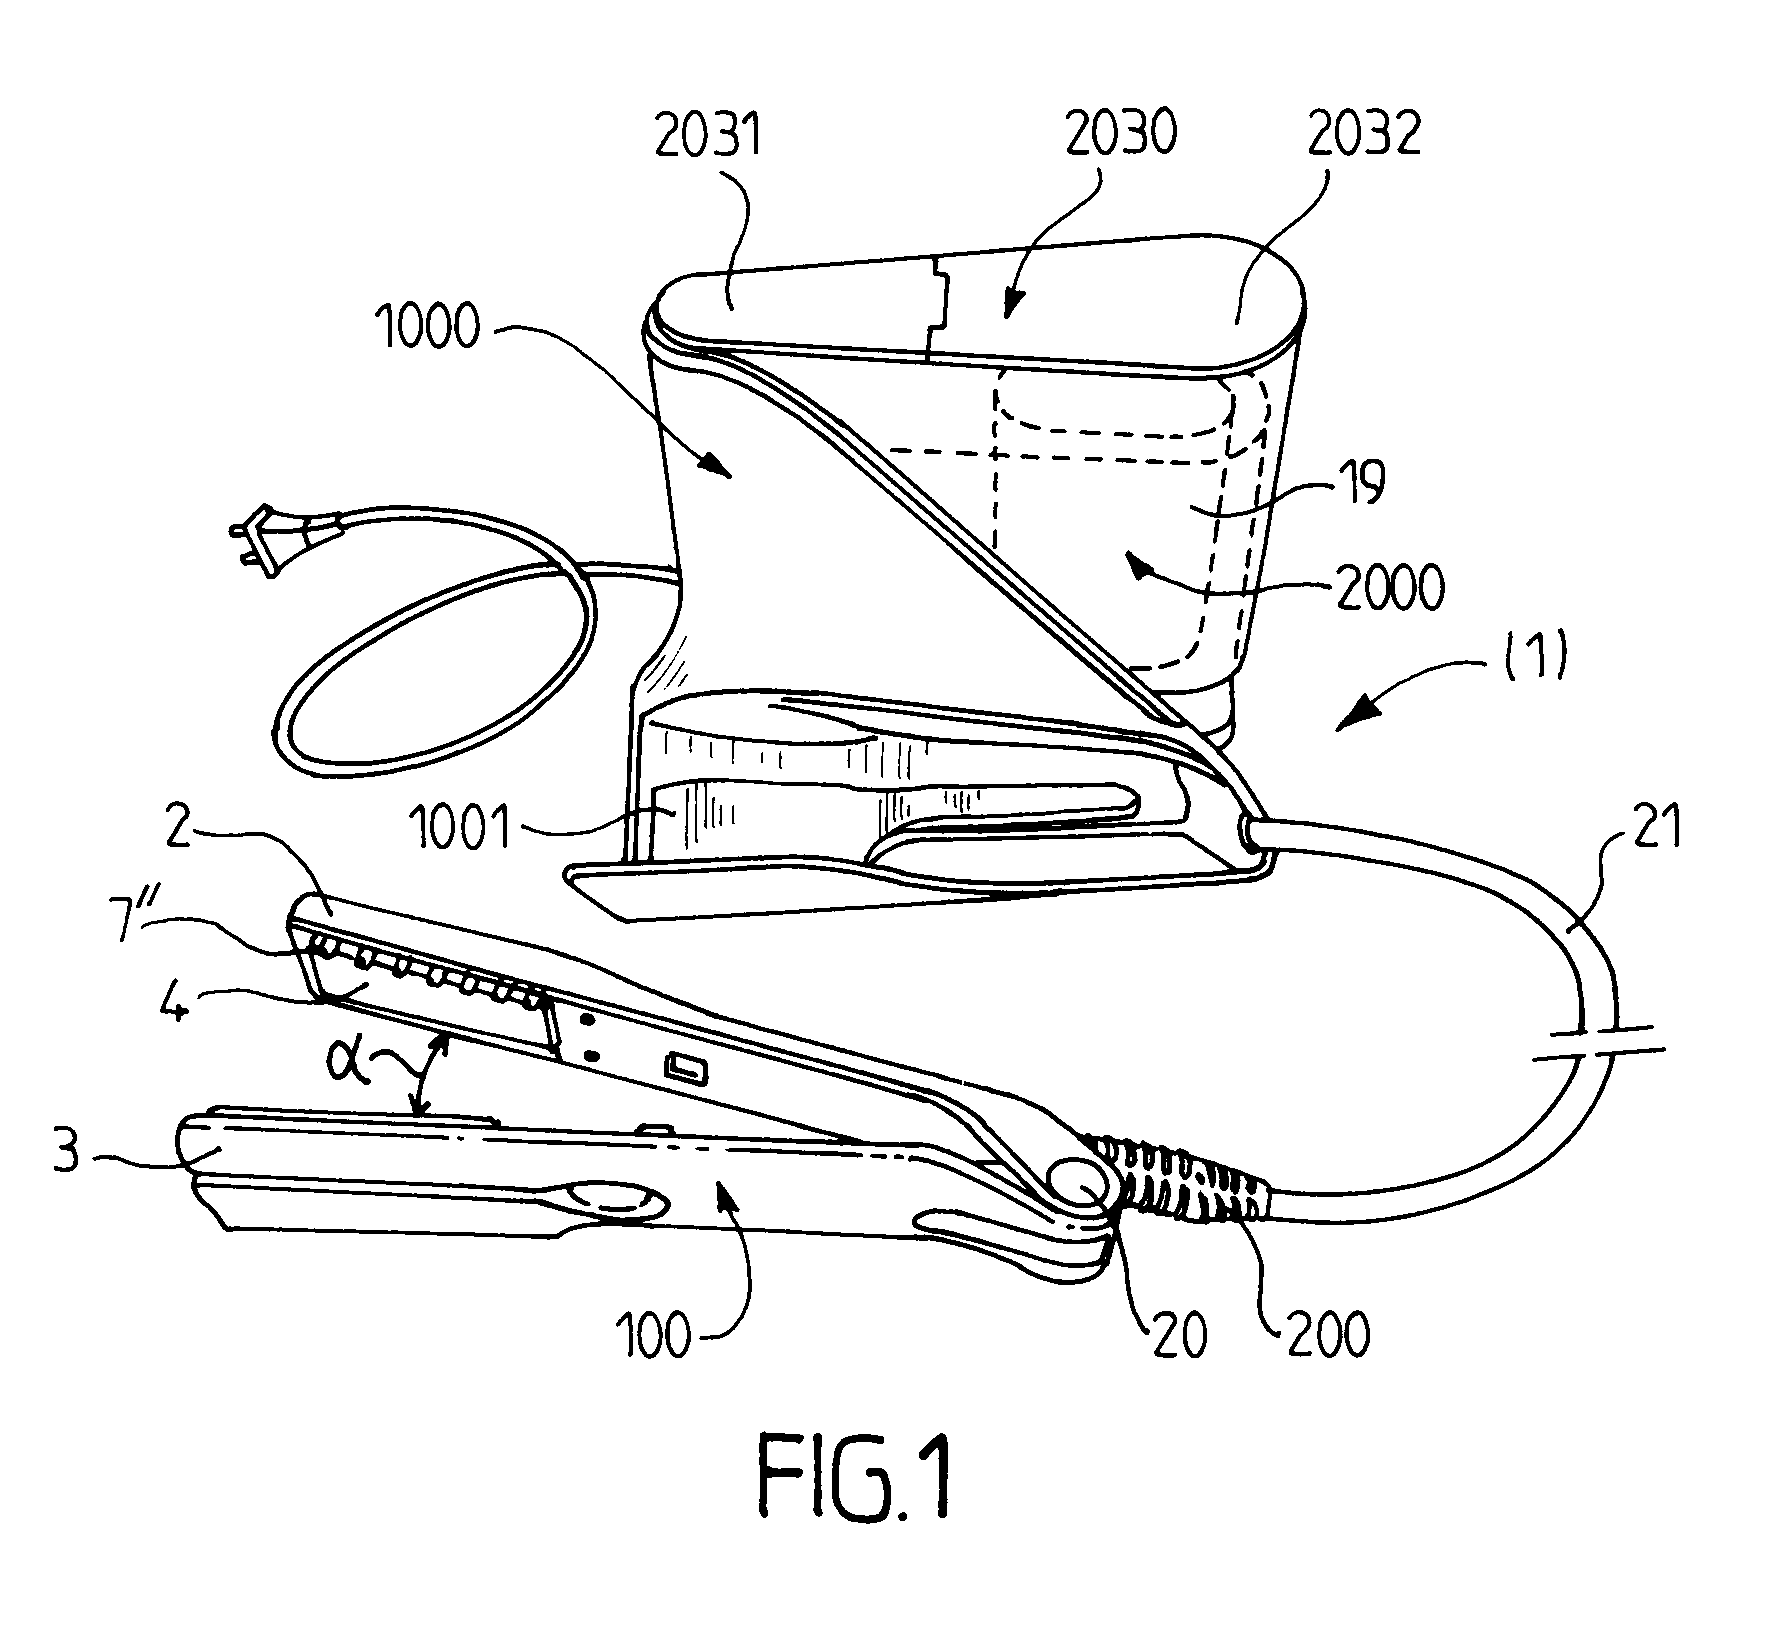 Steam Hairdressing Device Comprising a Base and a Portable Unit